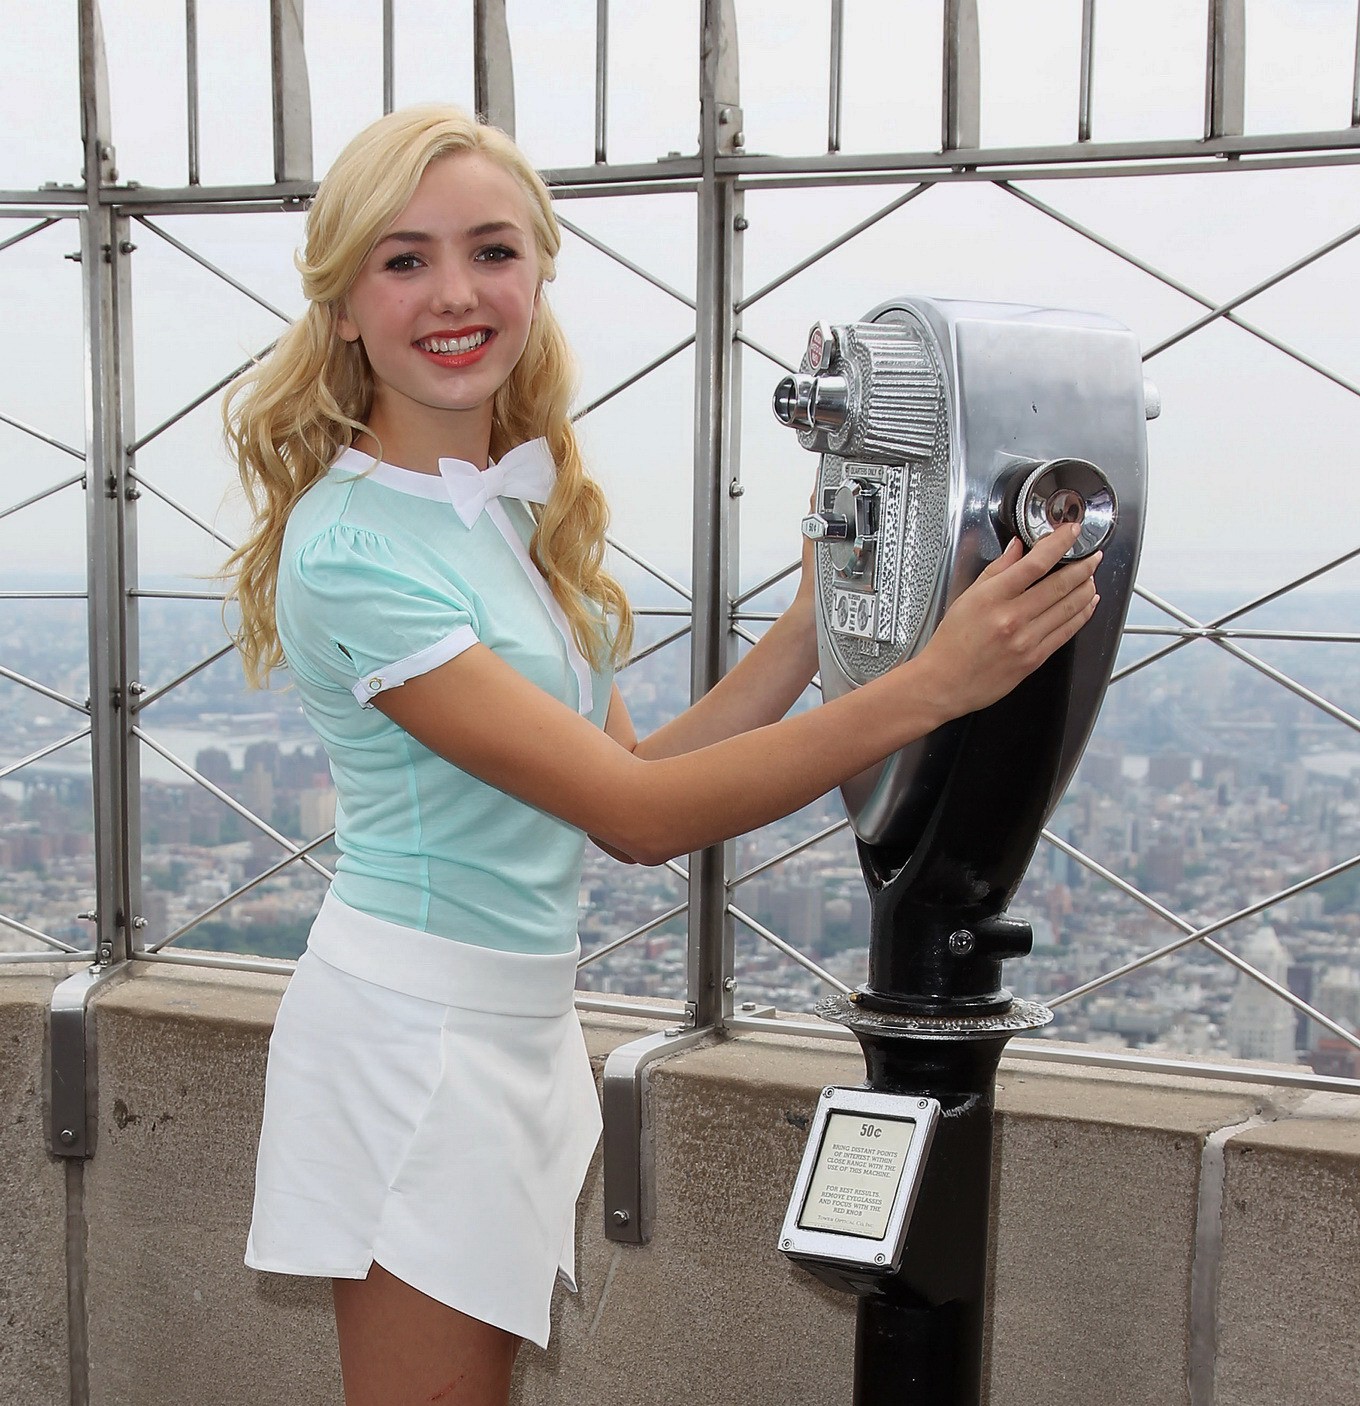 Peyton list leggy wearing tiny hot uniform at the empire state building photocal
 #75197228